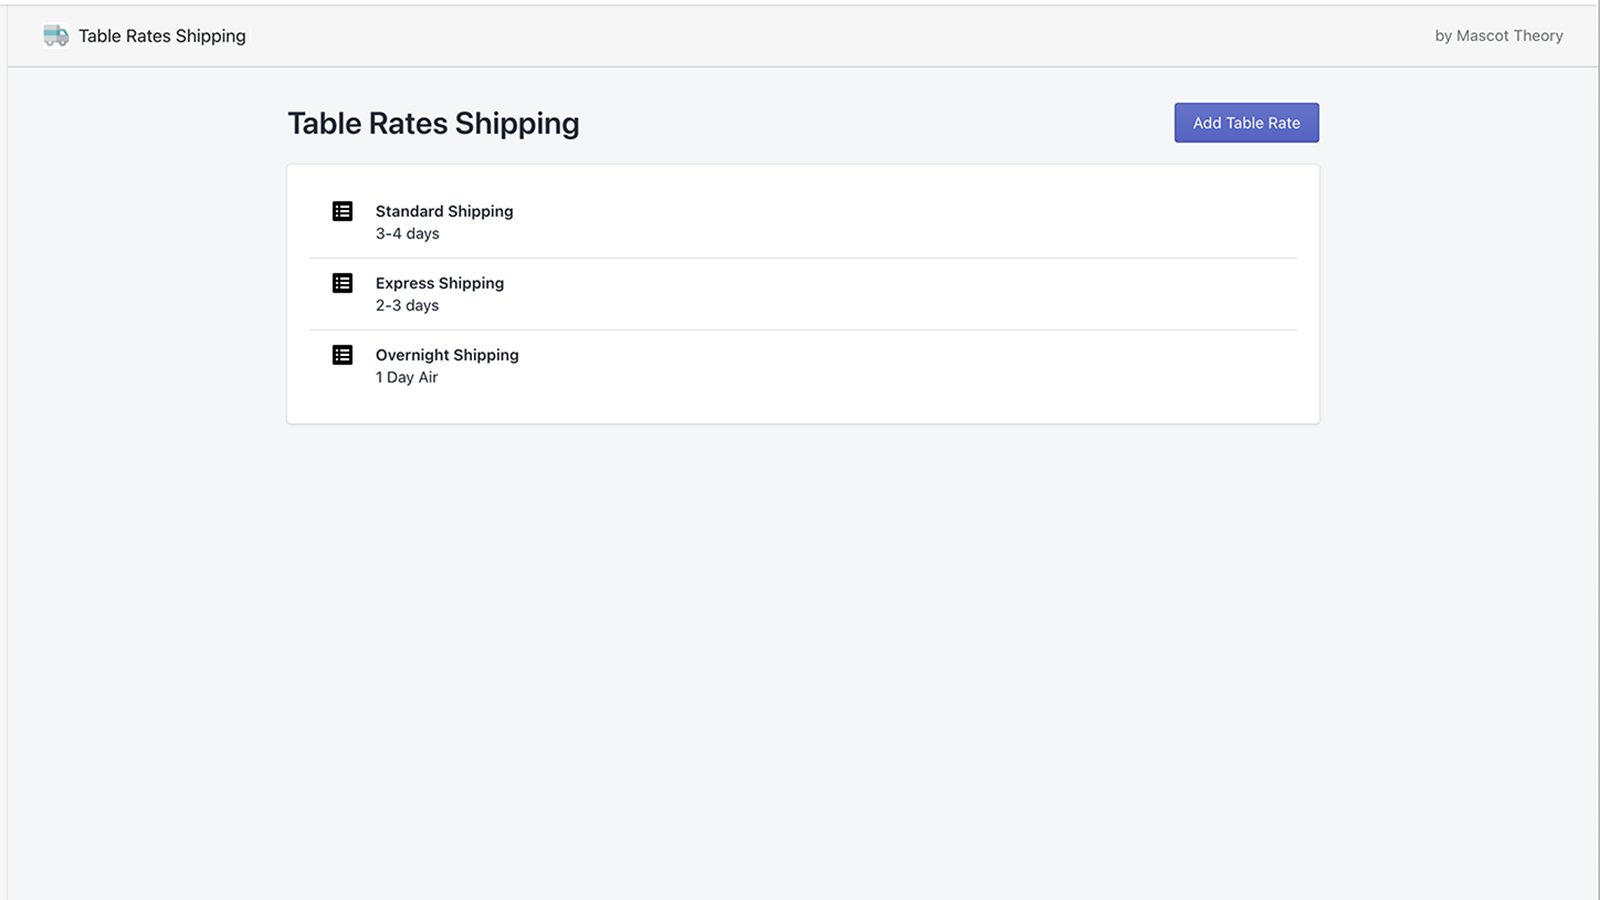 Set up to 10 rates for different shipping methods